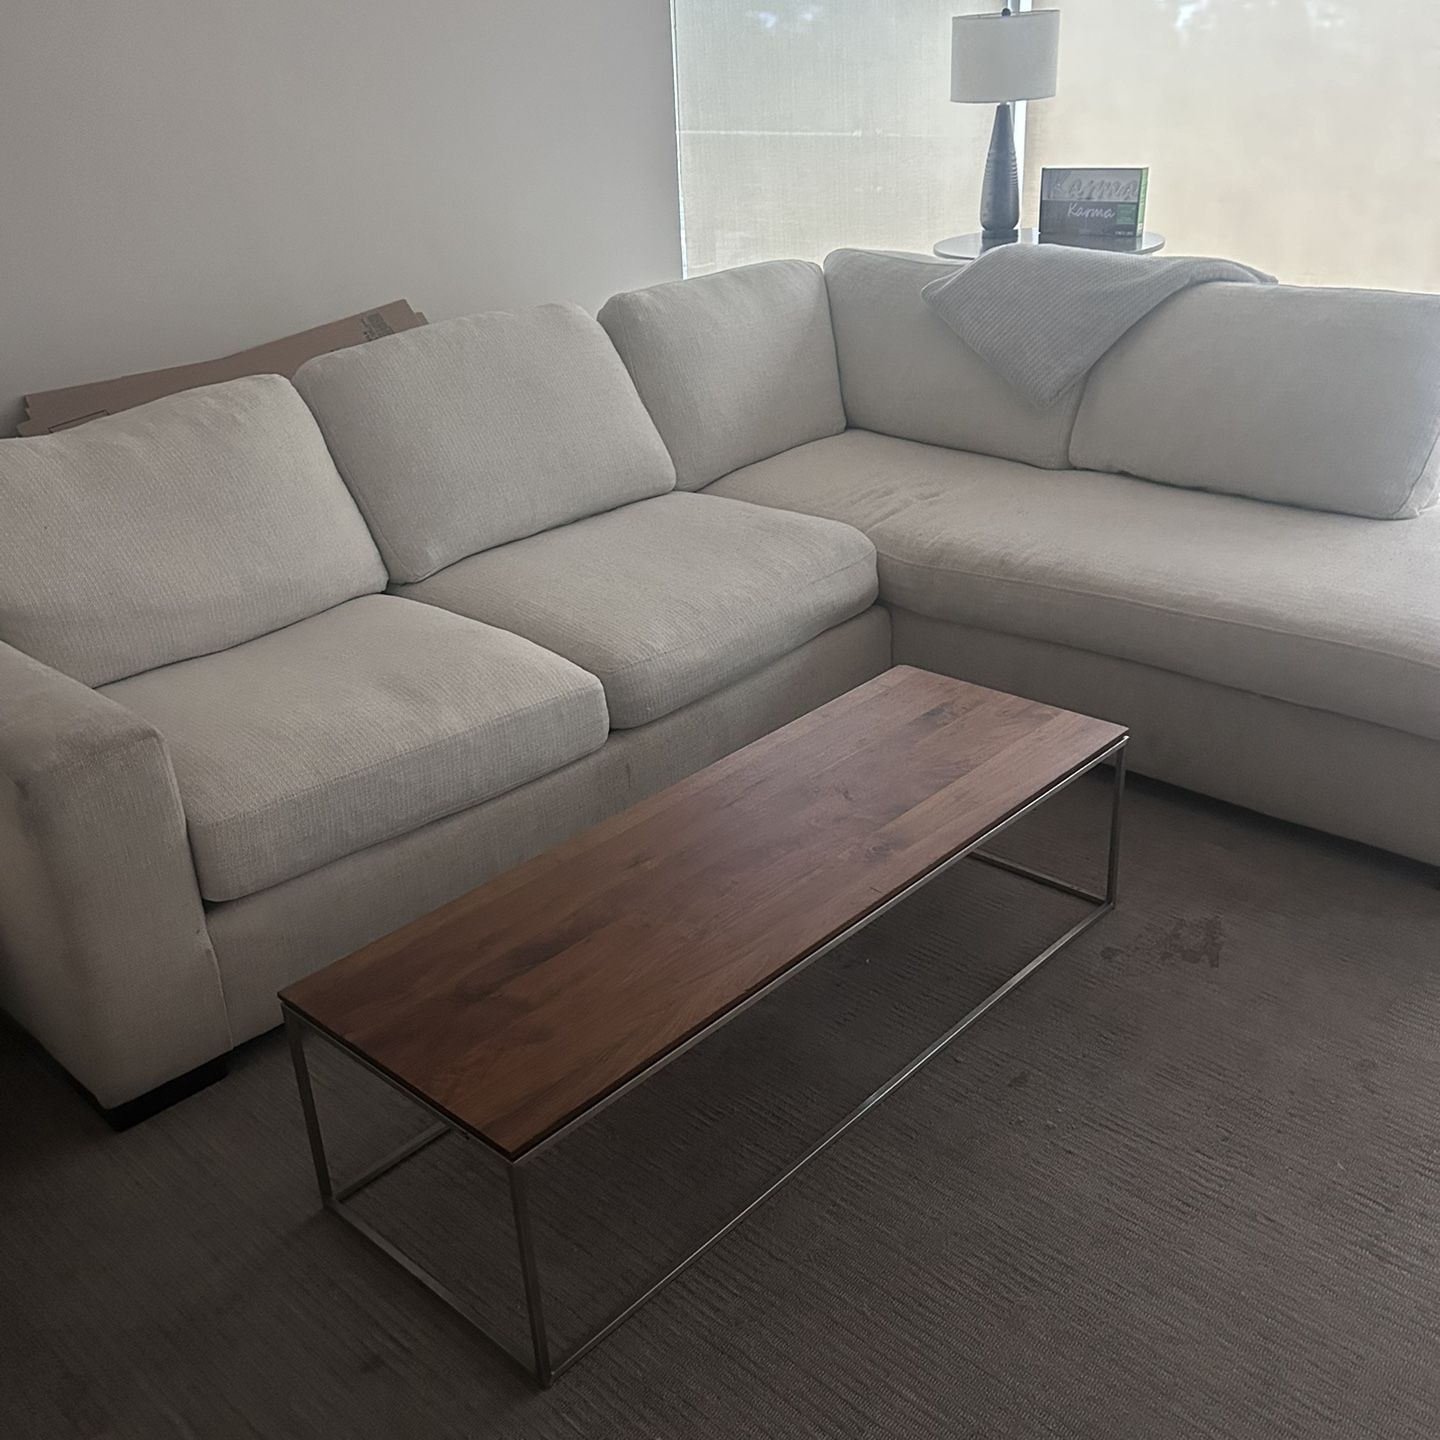 Z Gallery Sectional Couch - Moving Must Sell